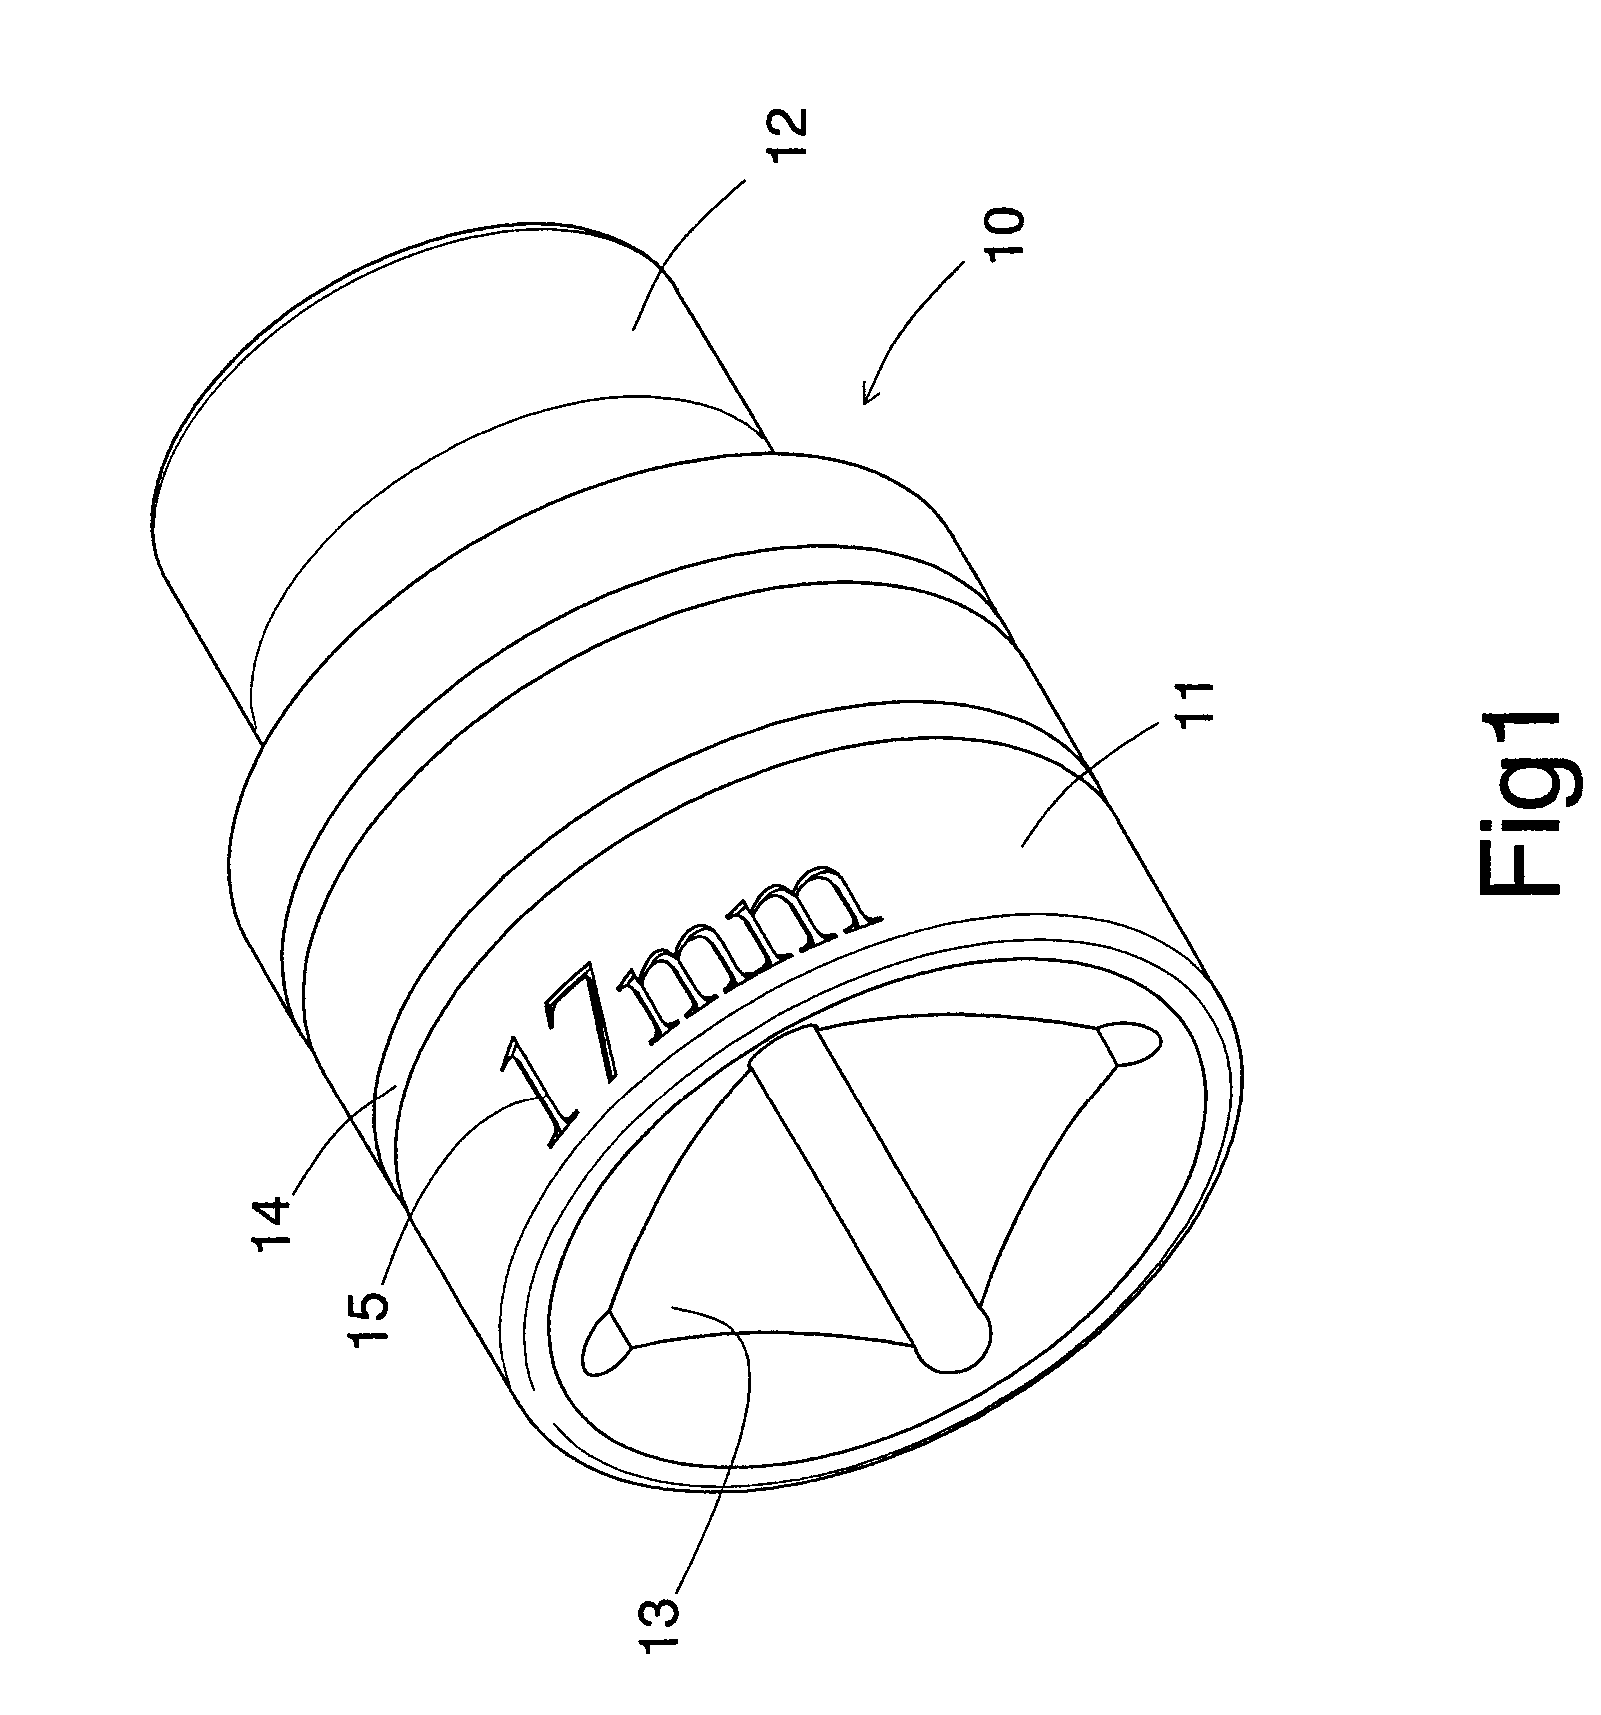 Sockets and method of surface treatment for sockets